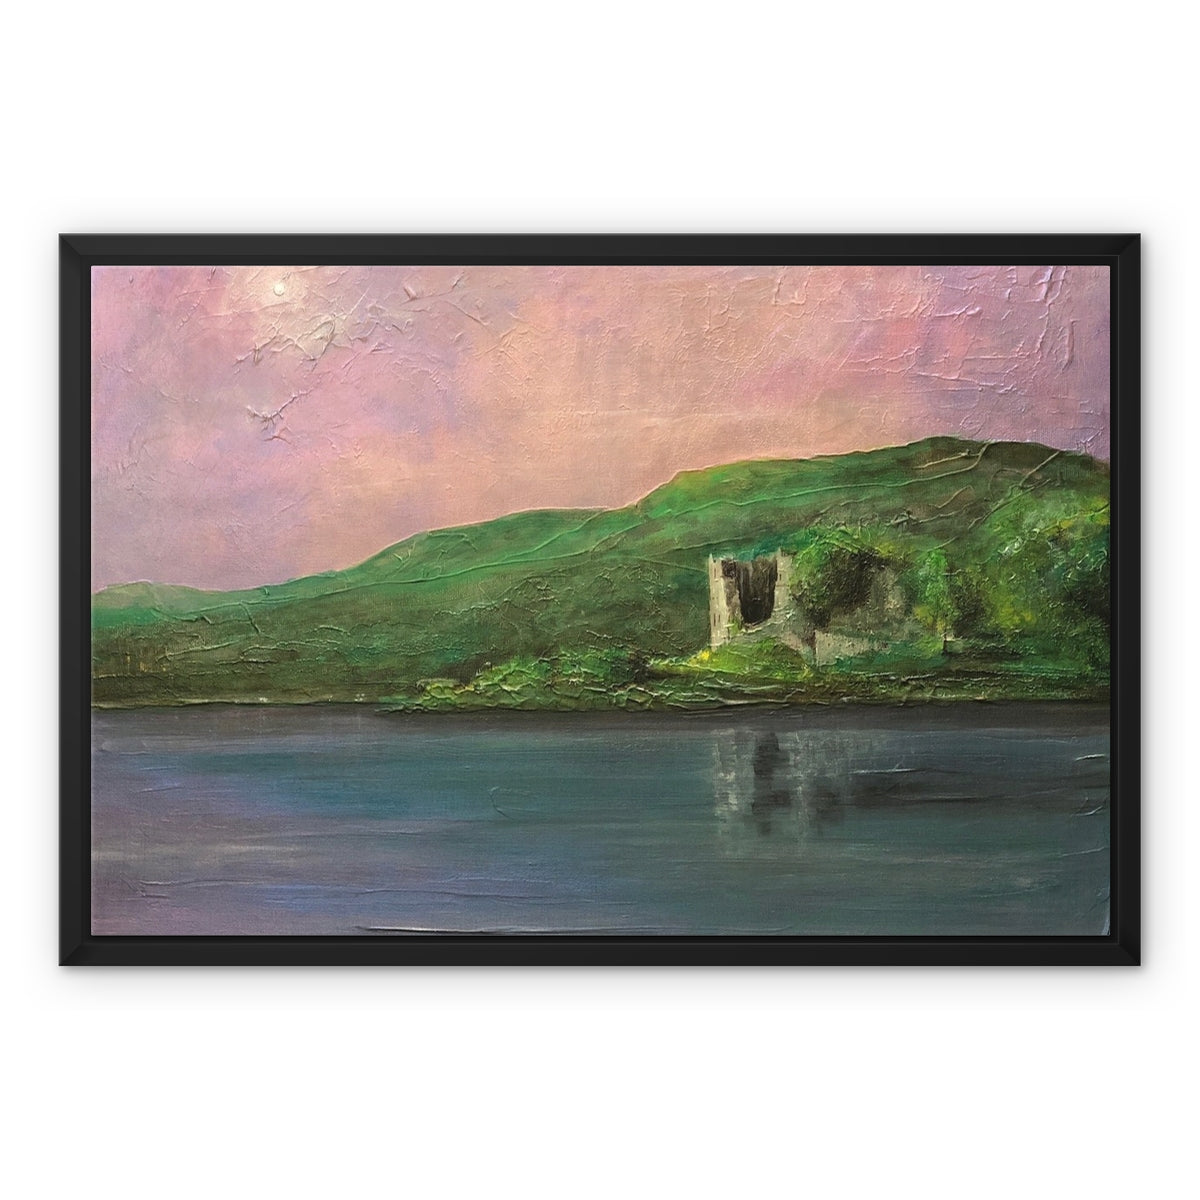 Old Castle Lachlan Painting | Framed Canvas From Scotland-Floating Framed Canvas Prints-Historic & Iconic Scotland Art Gallery-24"x18"-Paintings, Prints, Homeware, Art Gifts From Scotland By Scottish Artist Kevin Hunter